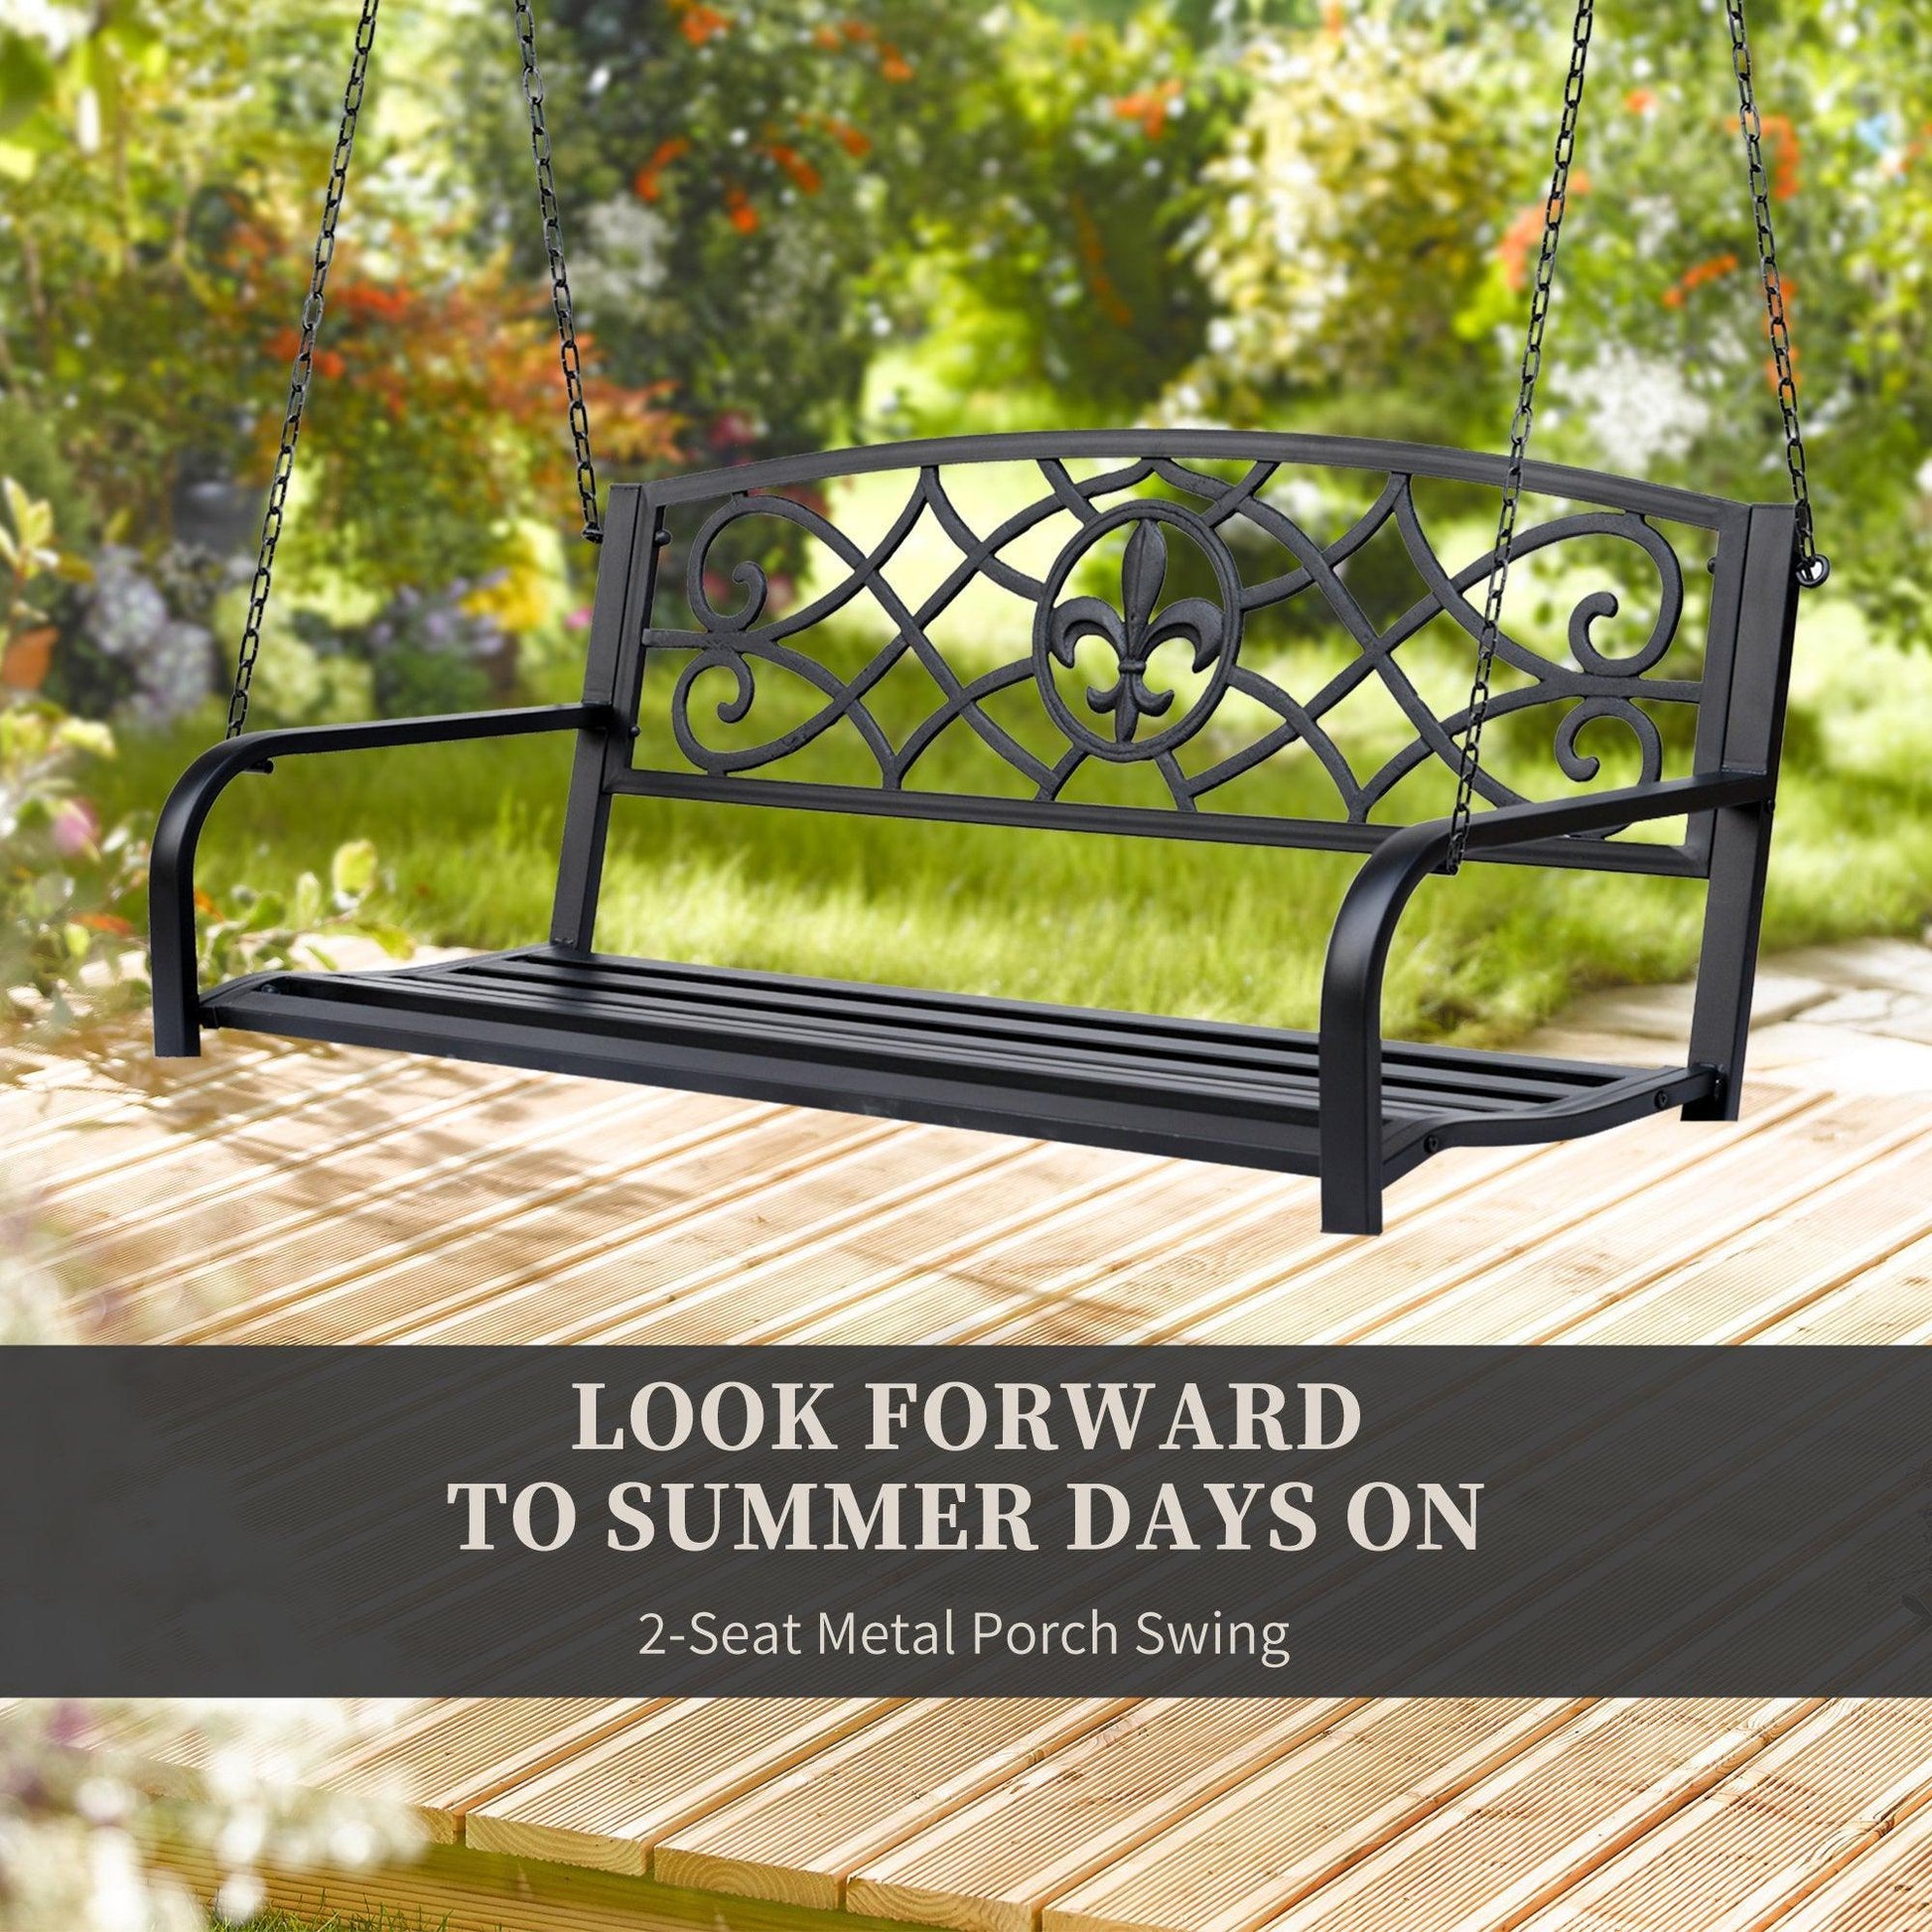 Outsunny Outdoor Swing Bench Seat for Yard, Deck, and Backyard - Black - ALL4U RETAILER LTD